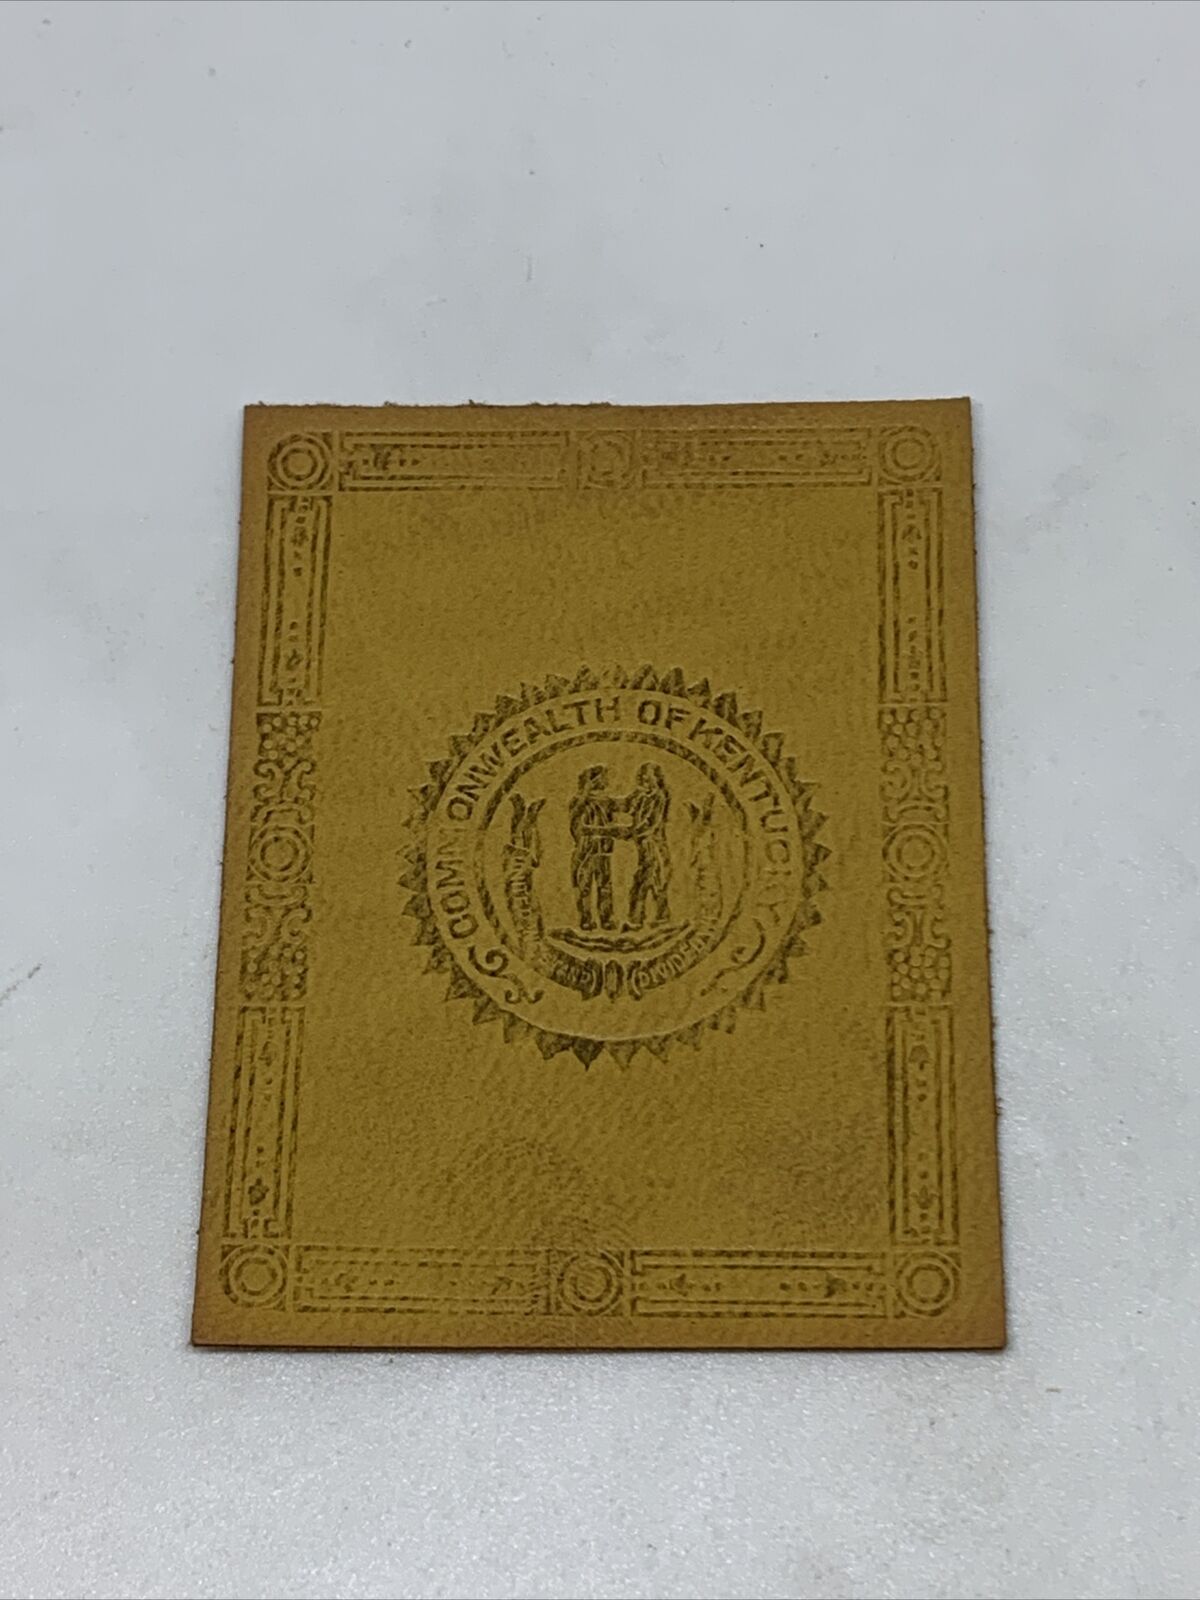 Vintage ca 1910s Commonwealth of Kentucky Seal Tobacco Premium Leather Patch